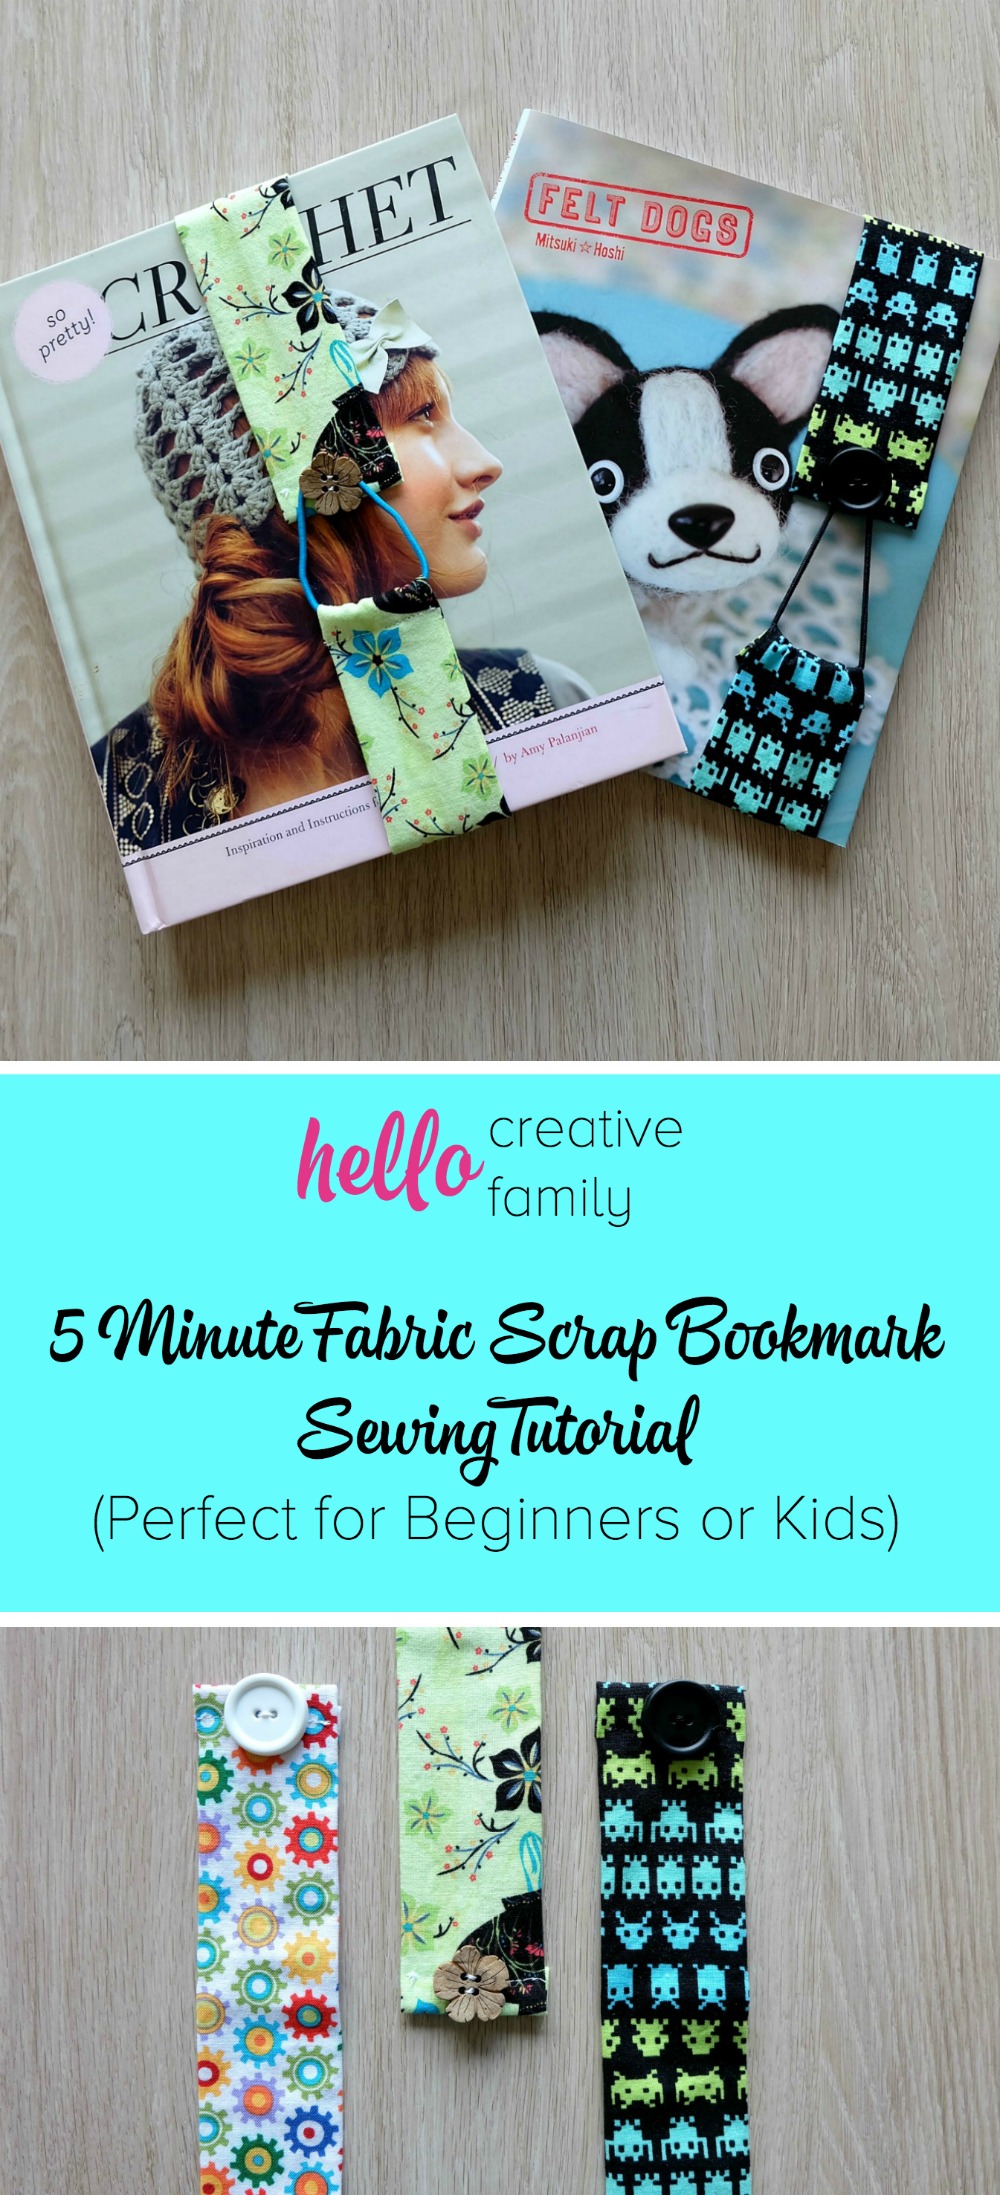 What a great beginner sewing project idea! It would make a great kid's craft project too! This 5 minute sewing project gives you step by step instructions, with photos for each step, on how to make a 5 minute fabric scrap bookmark! These would make great teacher gift ideas, stocking stuffer ideas, or father's day or mother's day gifts!